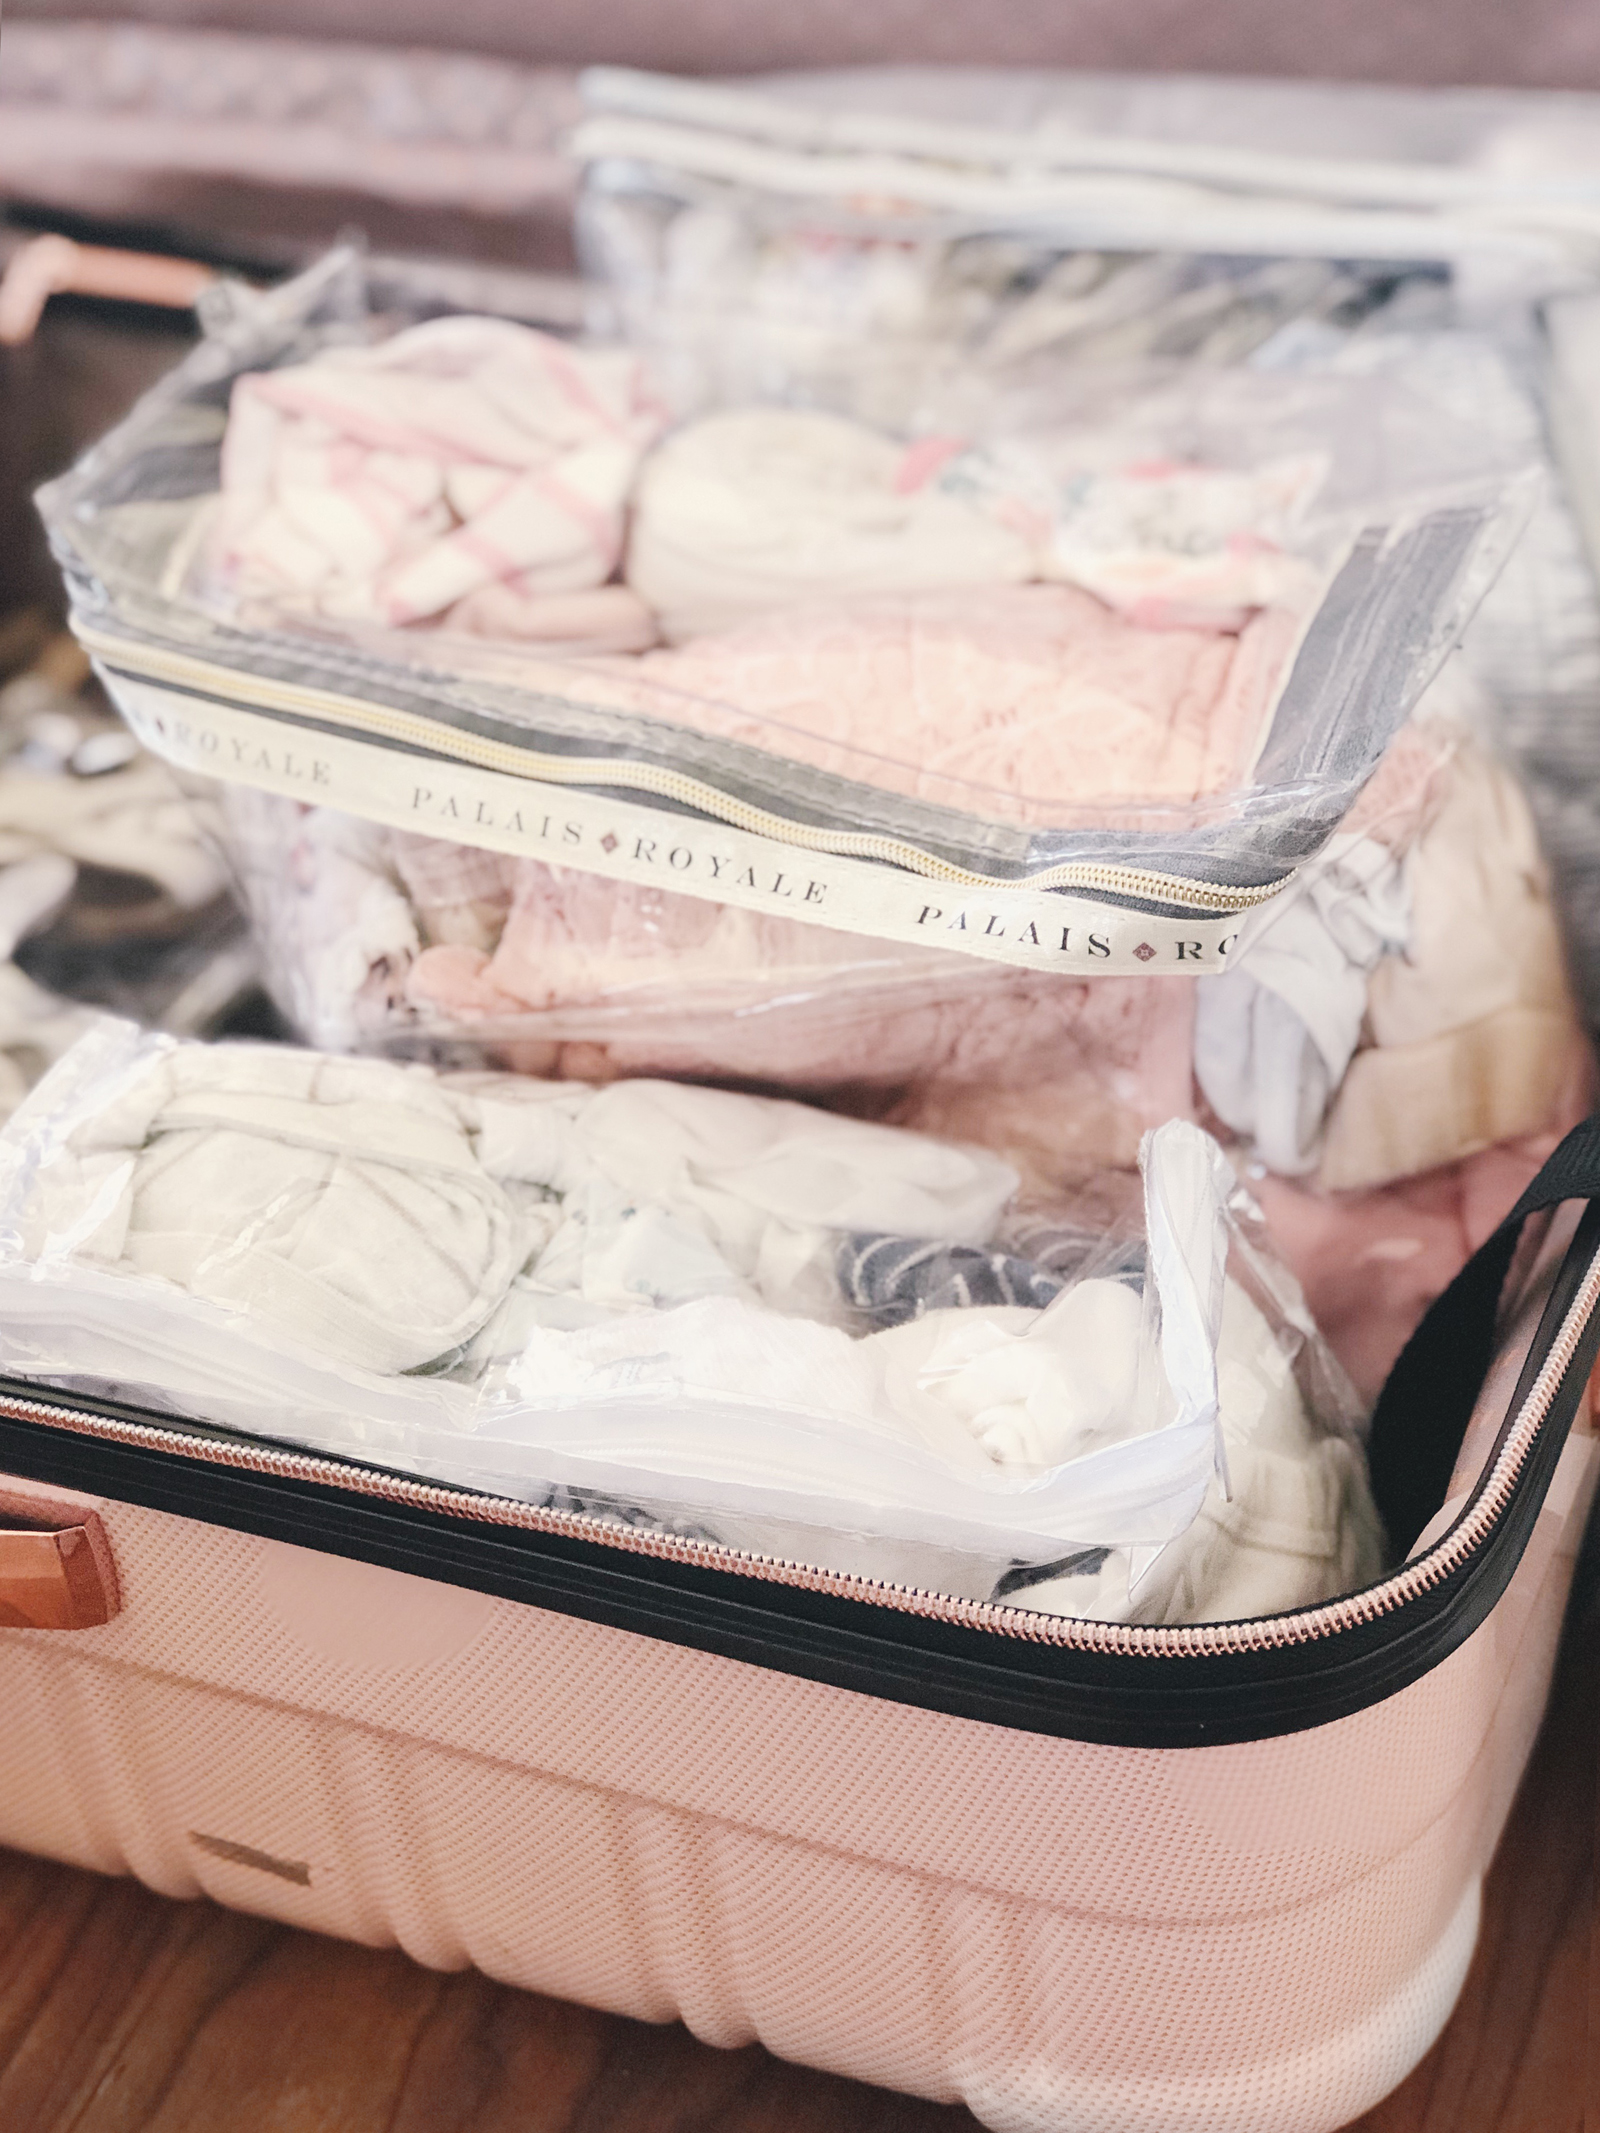 packing tip! do you have a bunch of these stashed away, too?!